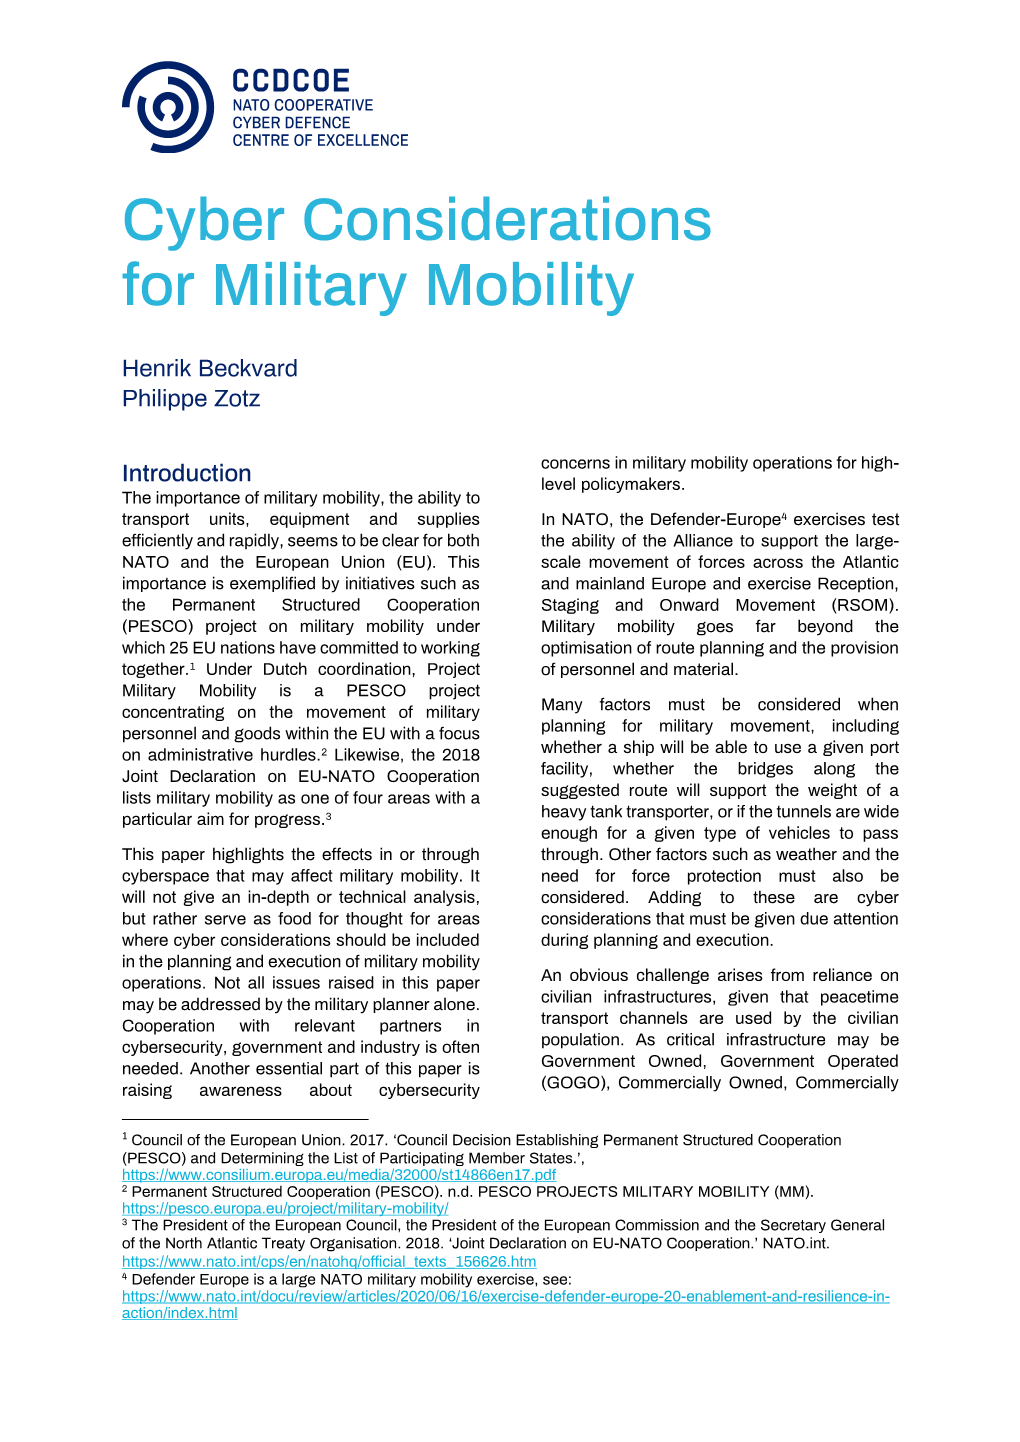 Cyber Considerations for Military Mobility